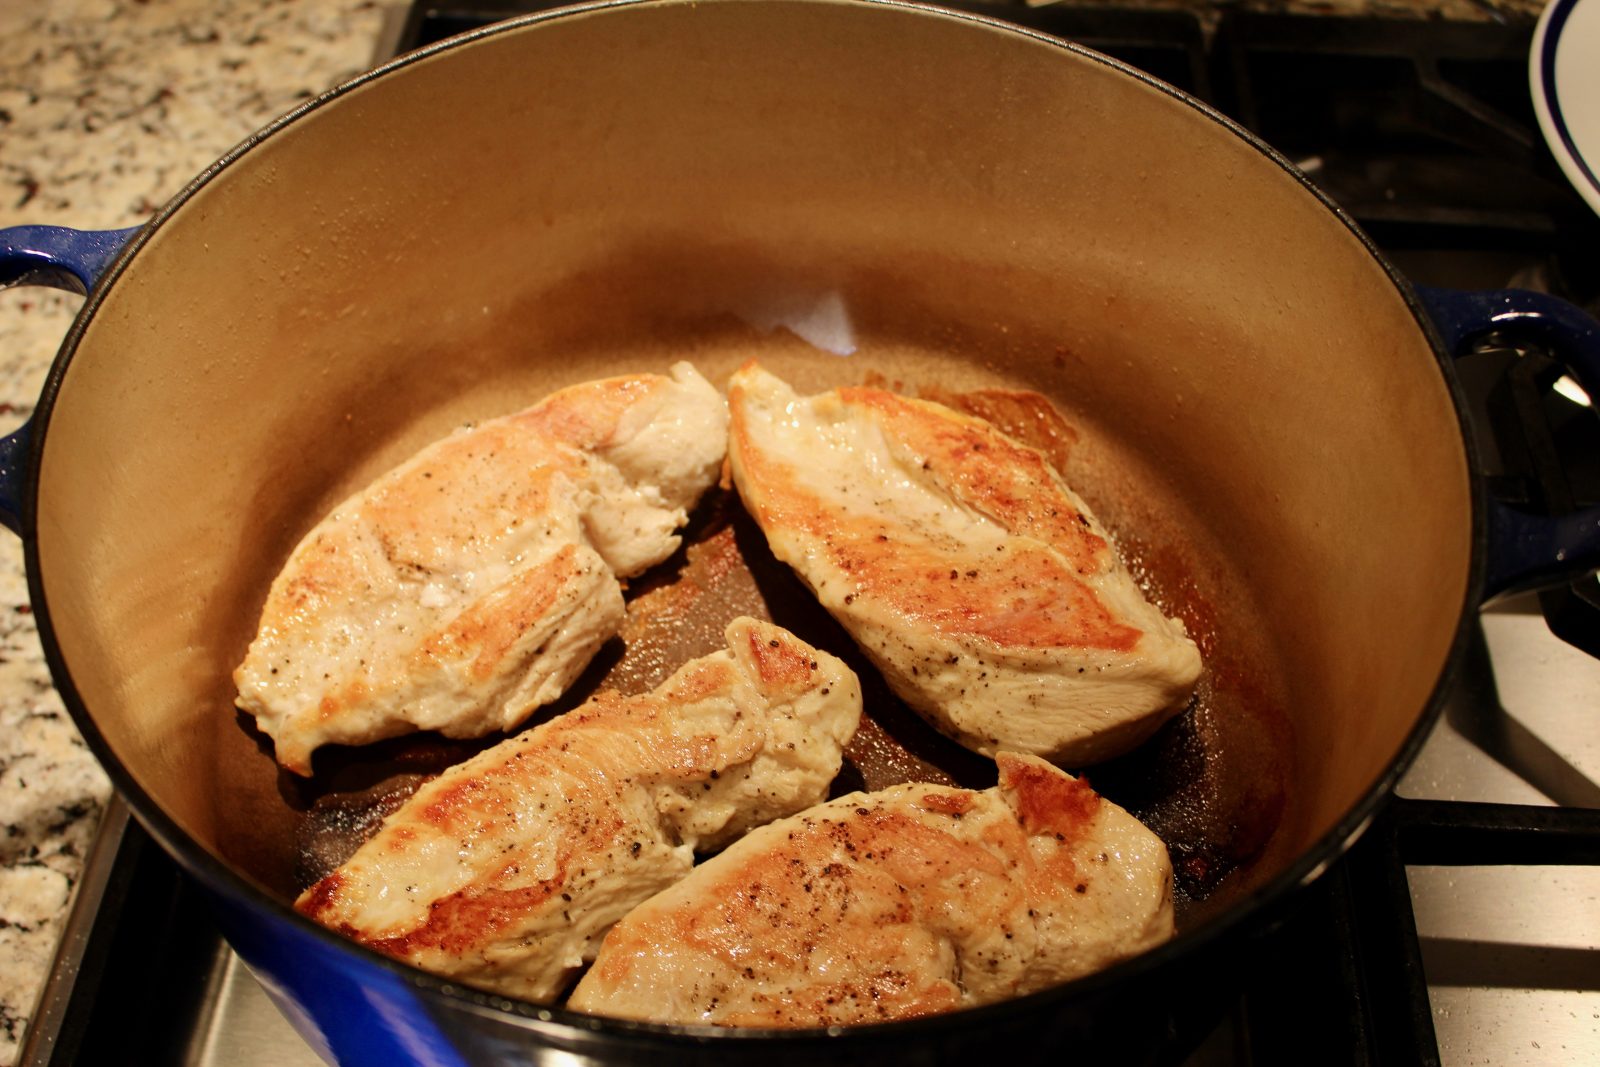 Recipe photo for White Chicken Chili showing a blue LeCreuset dutch oven with browned boneless skinless chicken breasts inside on gas stovetop.